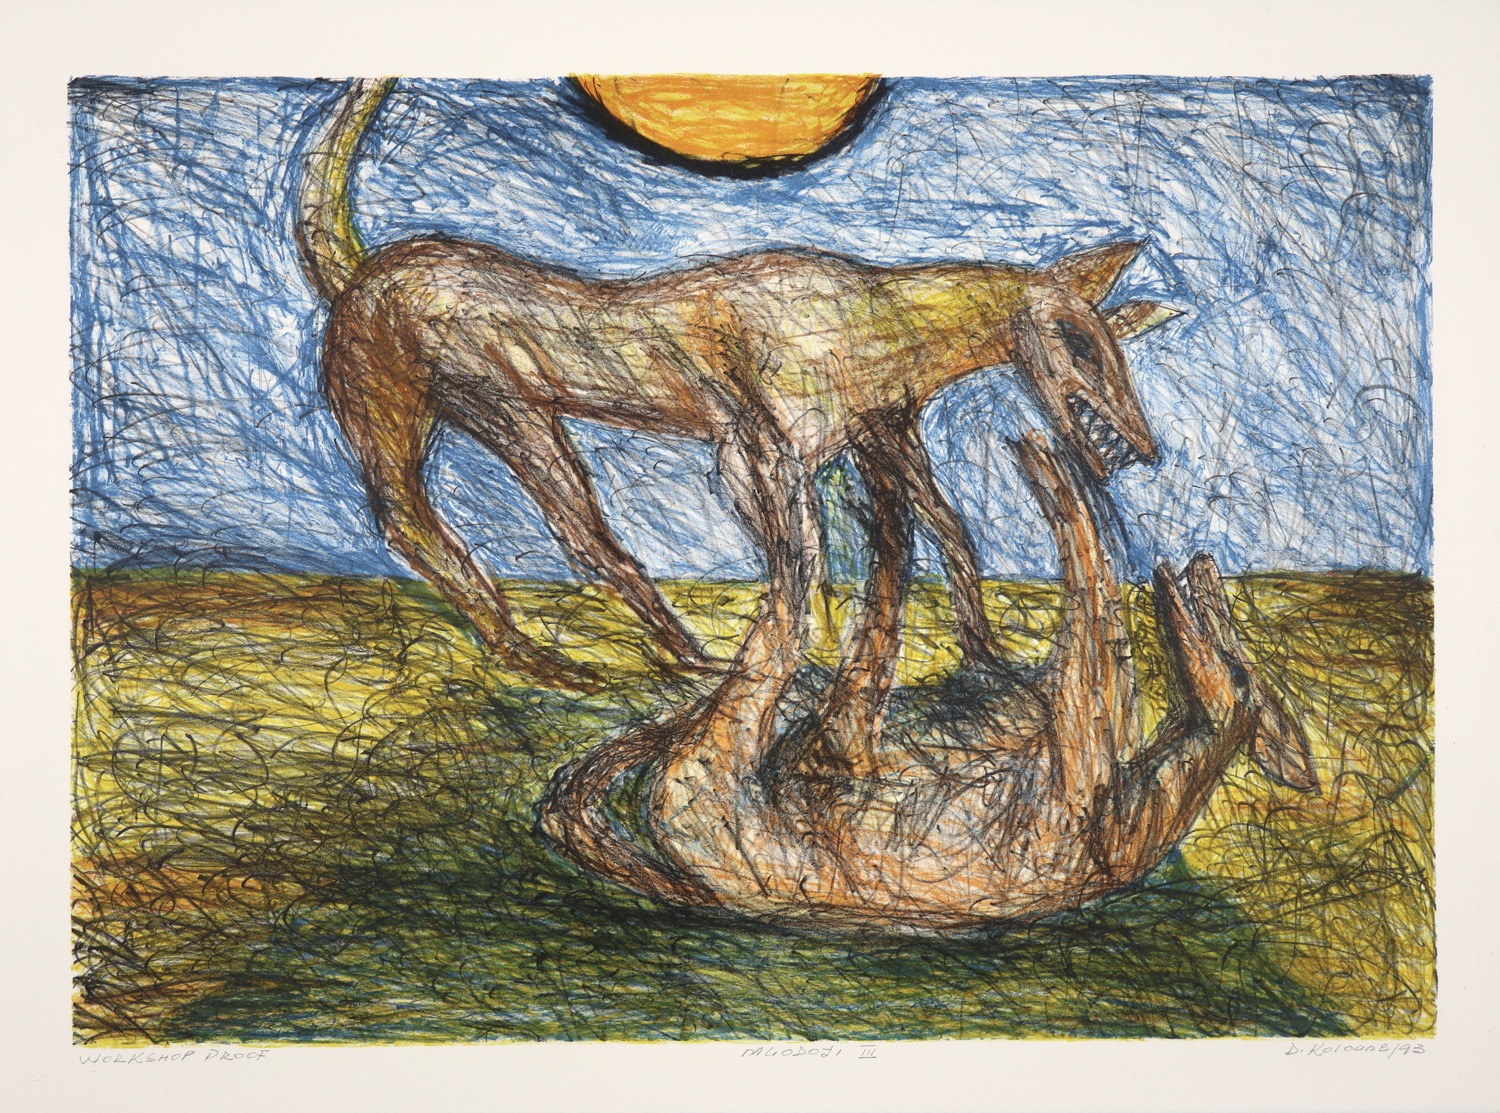 Landscape with sun with two dogs in the foreground fighting, one of them lying on its back.